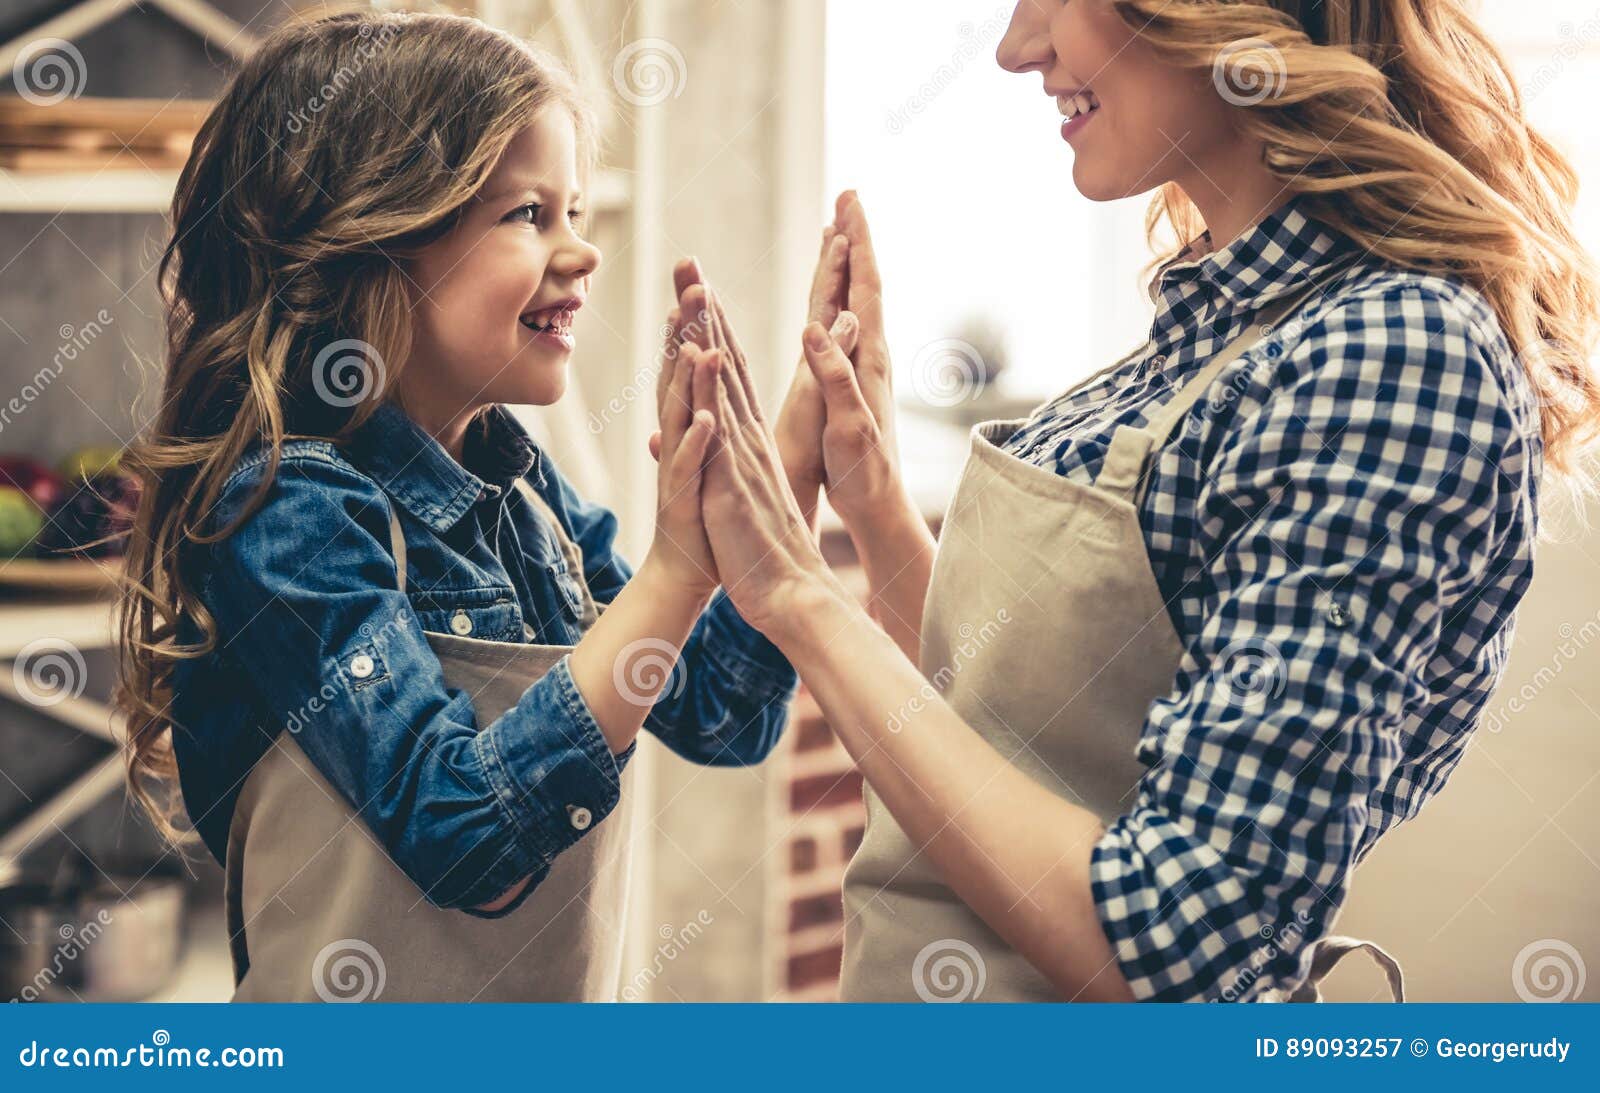 https://thumbs.dreamstime.com/z/mom-daughter-baking-cute-little-girl-her-beautiful-aprons-chef-hats-holding-hands-smiling-kitchen-89093257.jpg